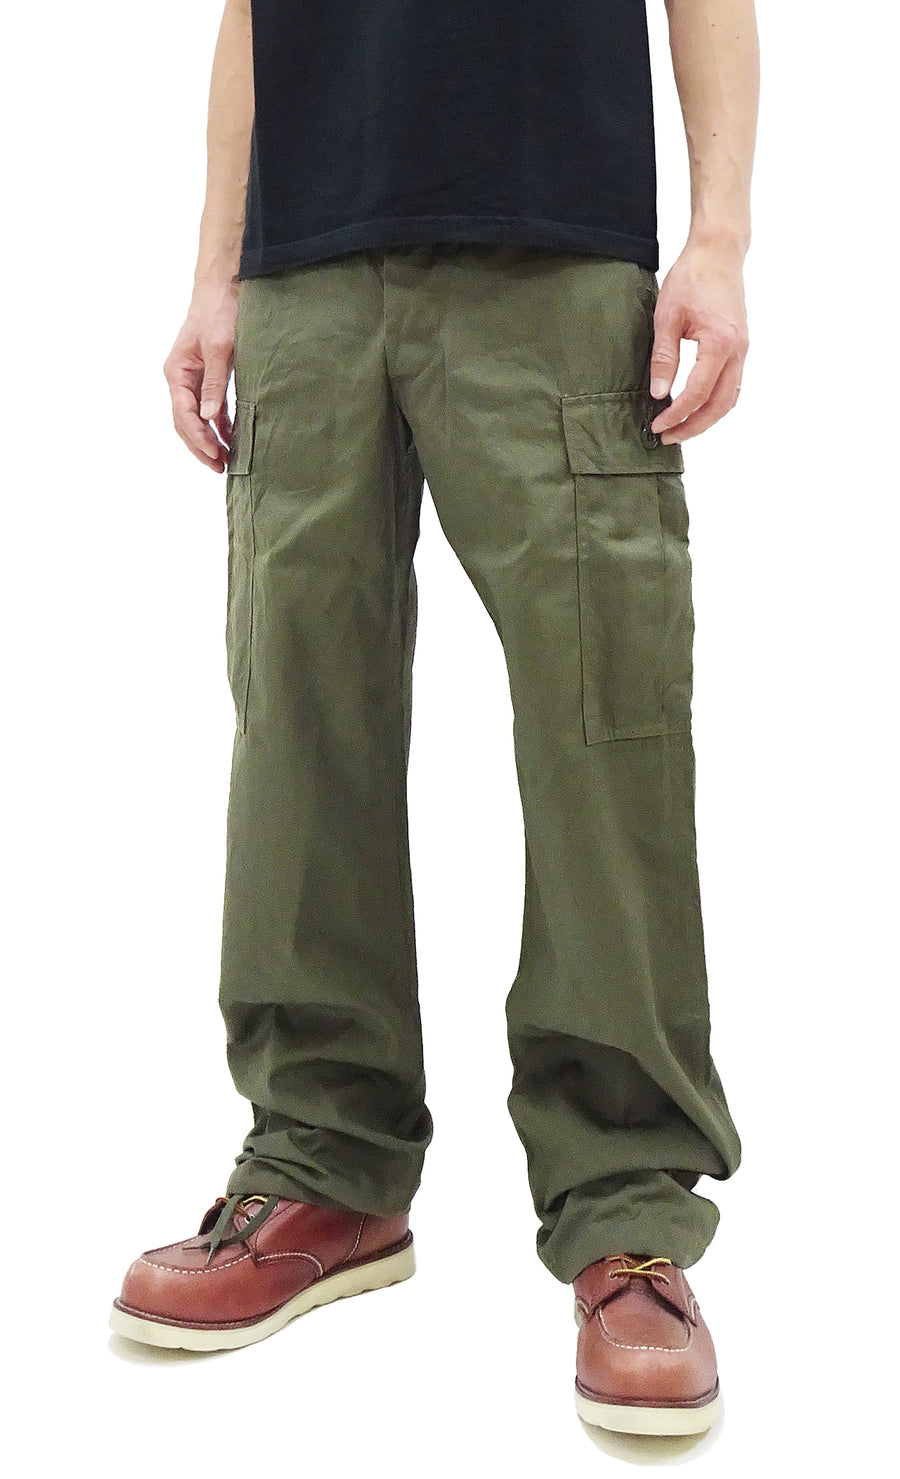 Utility Cargo Pants for the Modern Lee Male